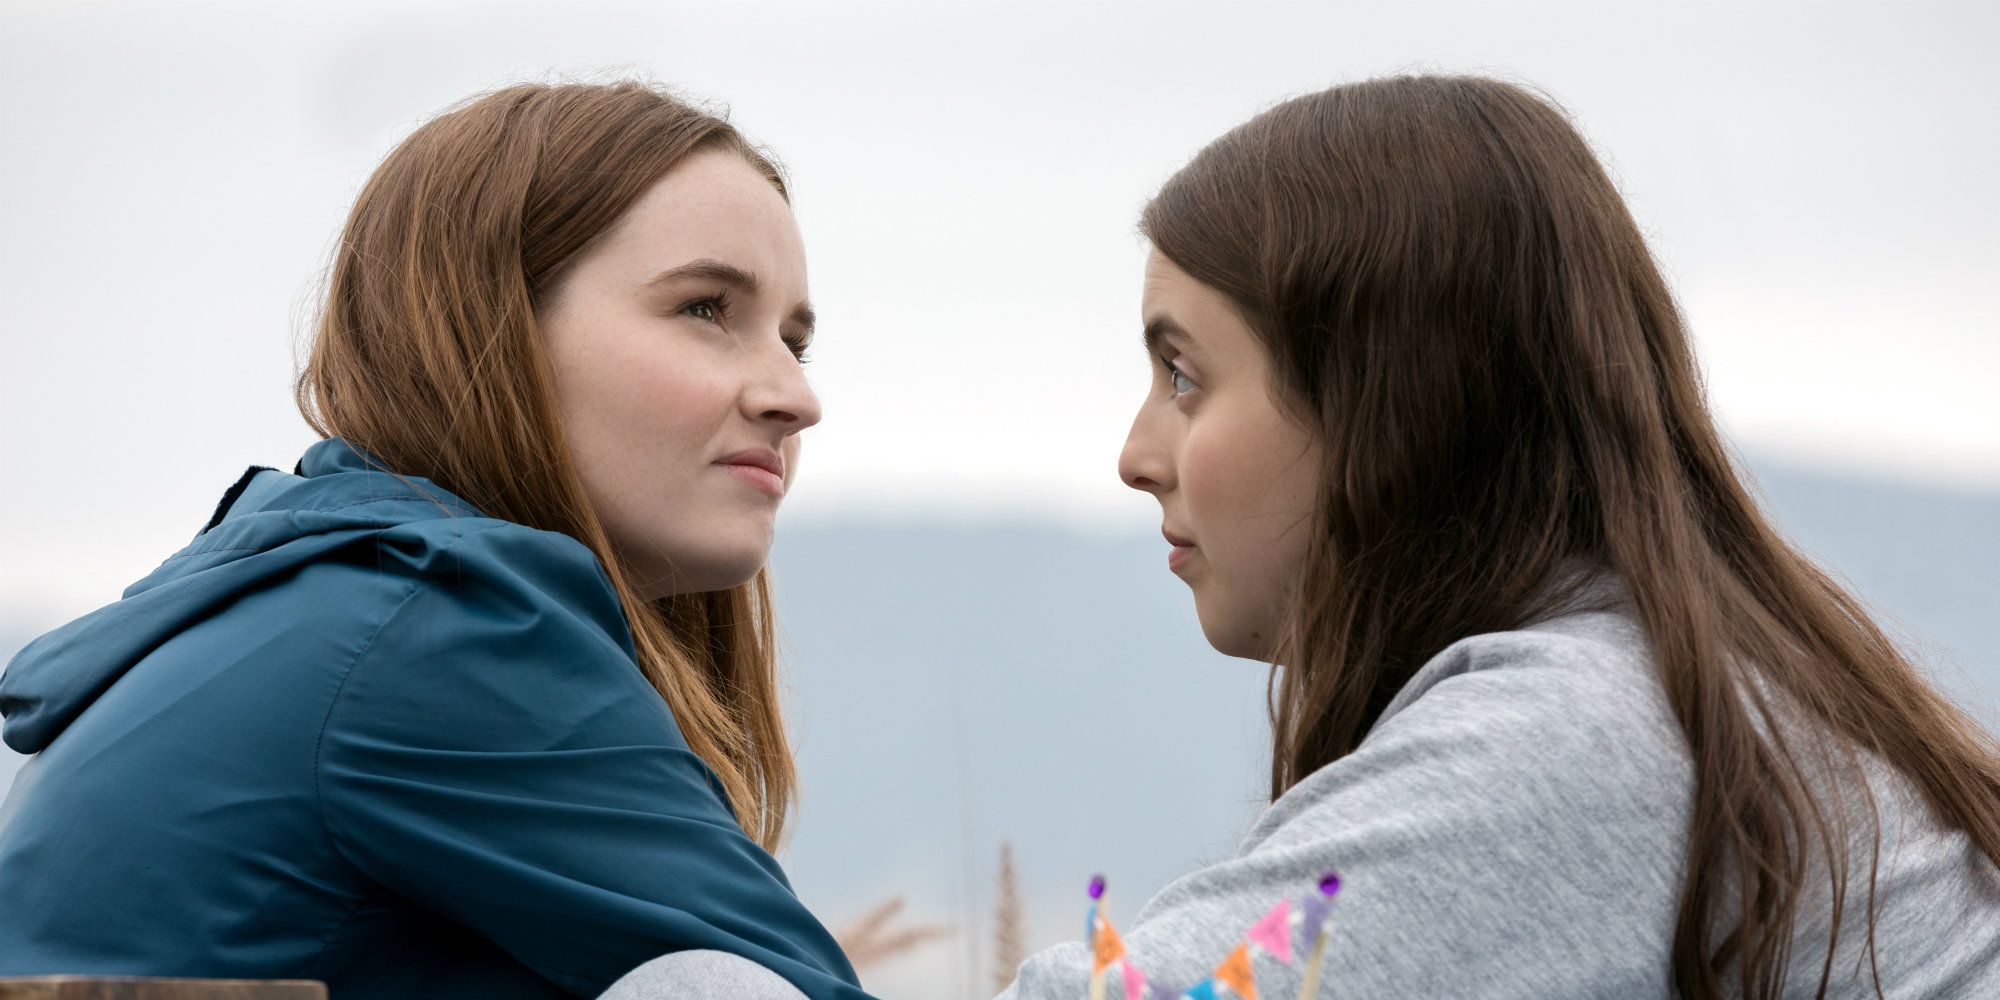 Booksmart Review: A New & Hilarious Spin On High School Comedies